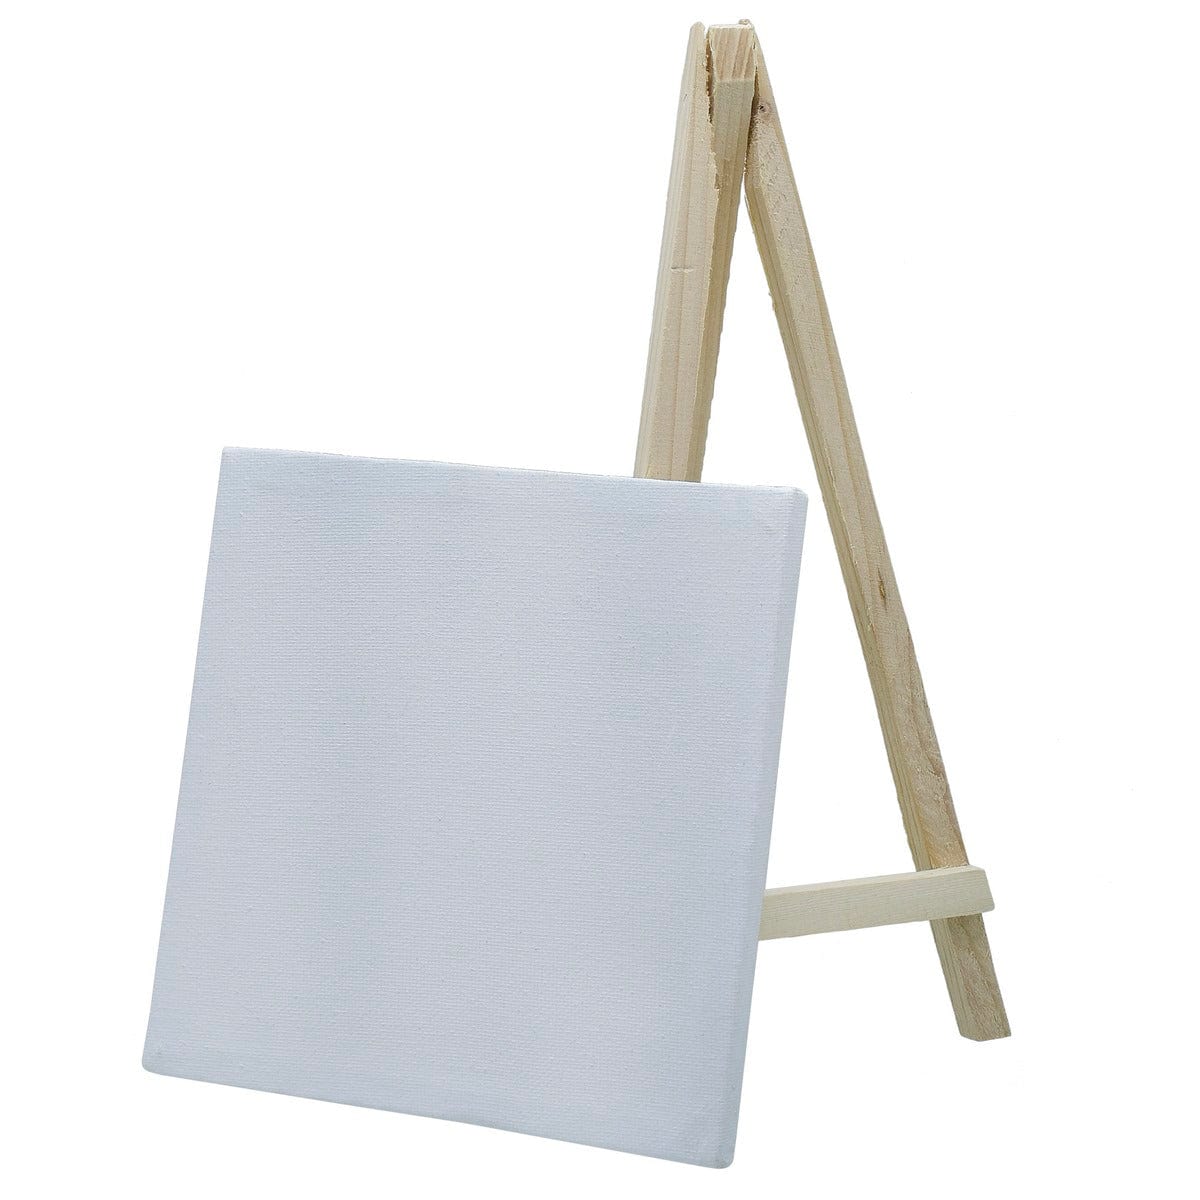 jags-mumbai Easel & Canvas Canvas Frame With Mini Easel Combo 6X6 Inch